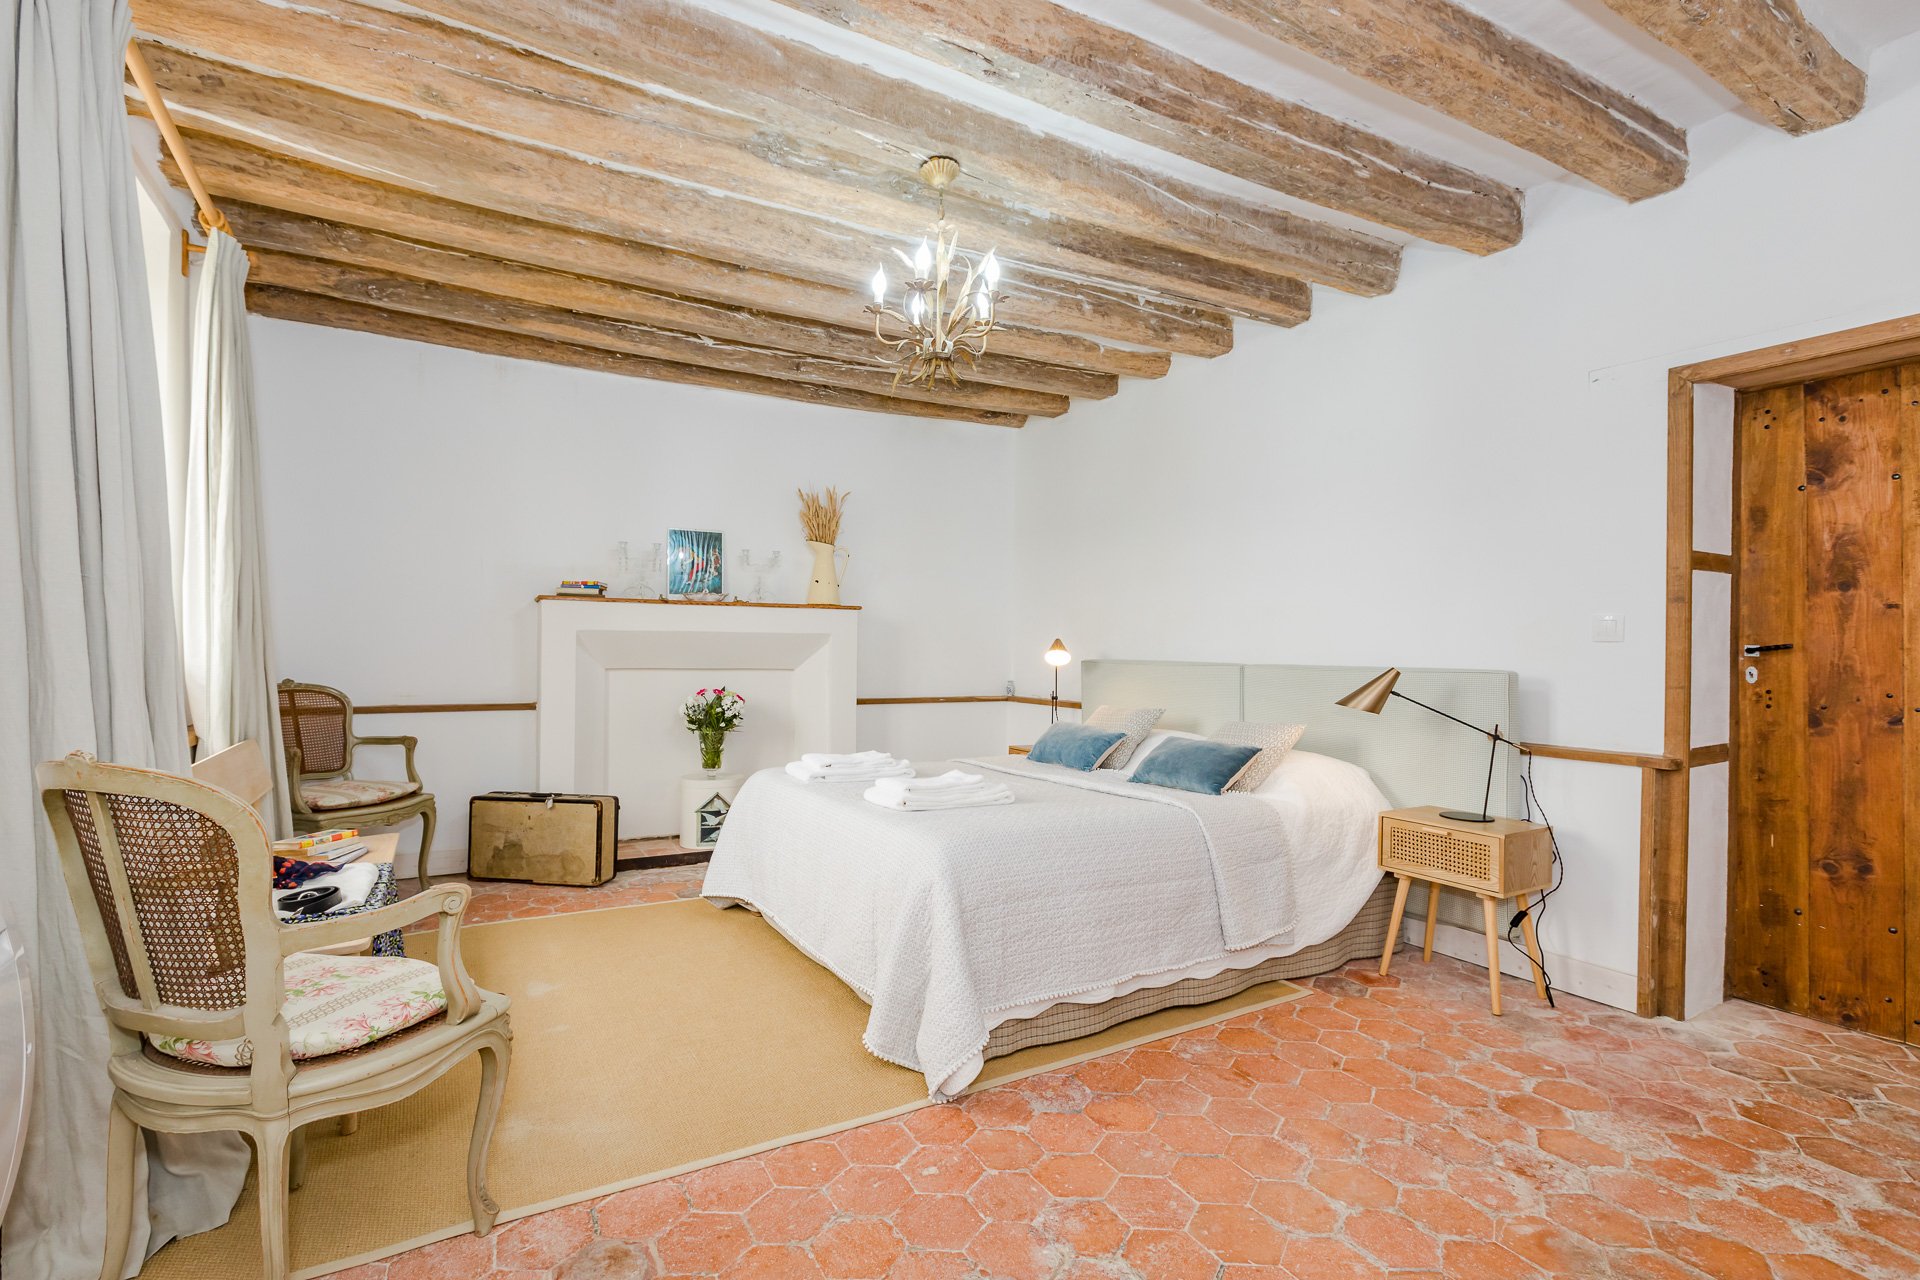 A ground floor ensuite bedroom with wooden beams and fireplace, part of a farmhouse available for rent near Paris.